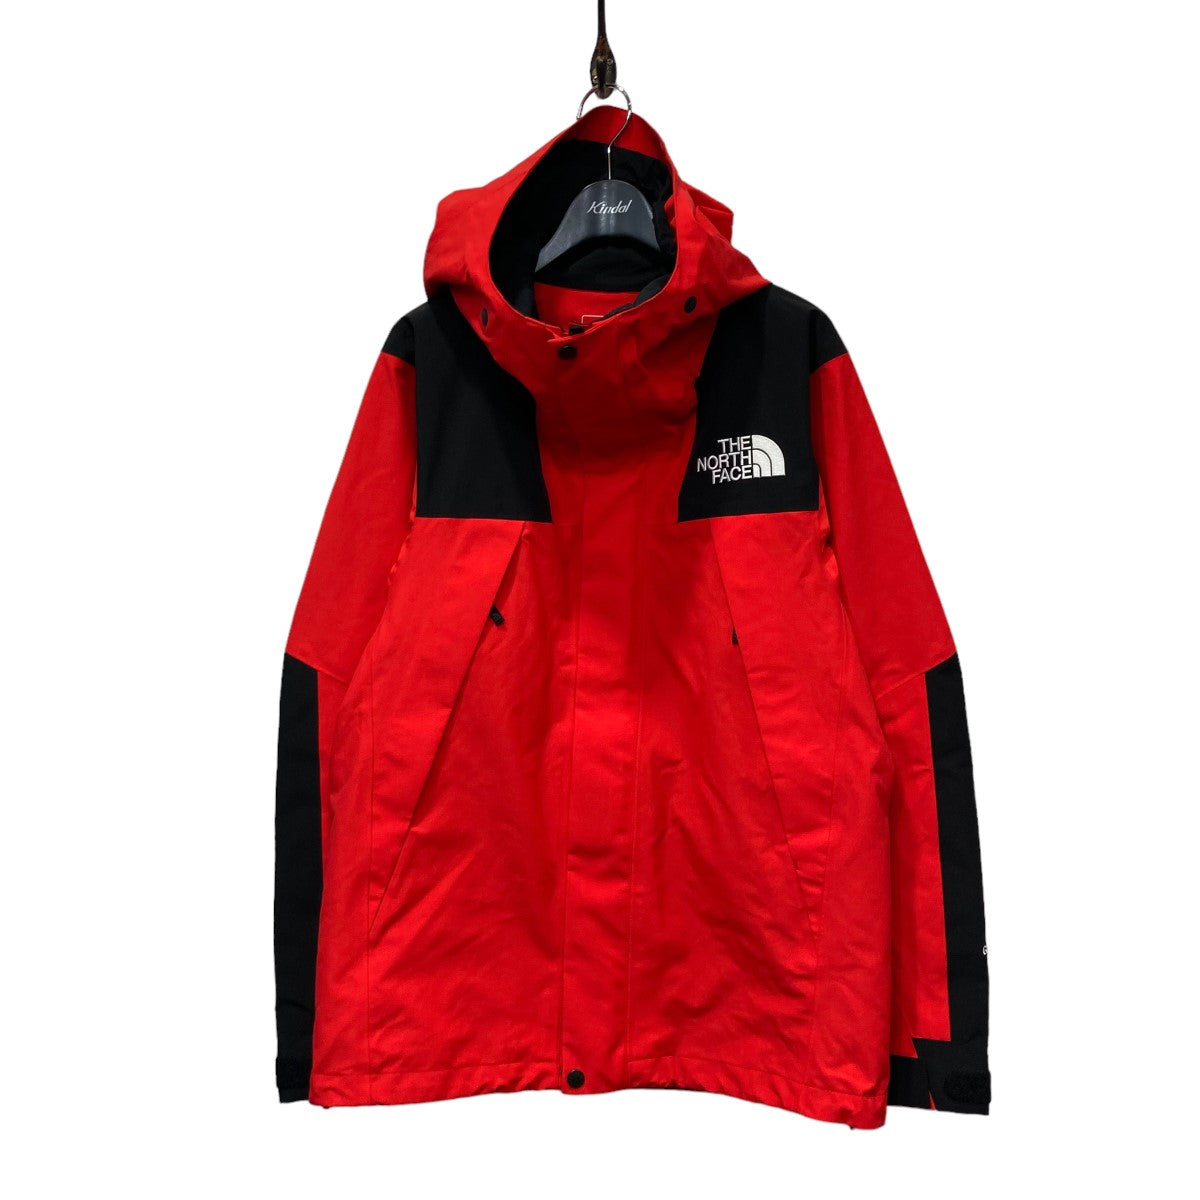 THE NORTH FACE(ザノースフェイス) NP61800「Mountain Jacket 